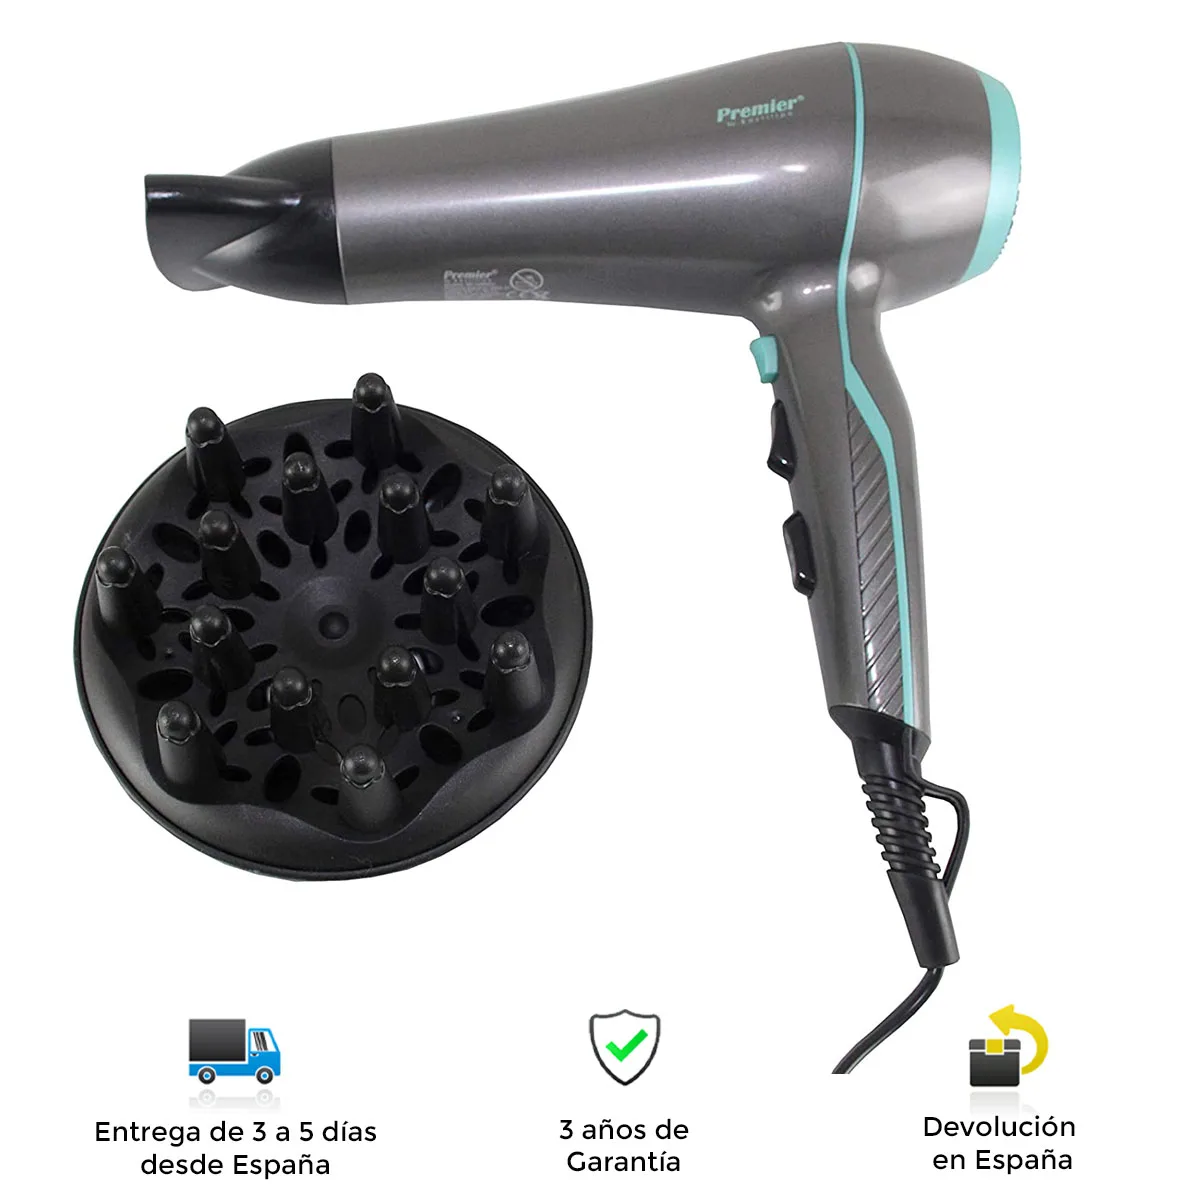 Hair dryer Bastilipo Sp 2200 Dc, power 2200DC dc motor with 2 speed and 3  levels, removable rear grille for easy cleaning, cold air button for fixing  hair, hair dryer| | - AliExpress